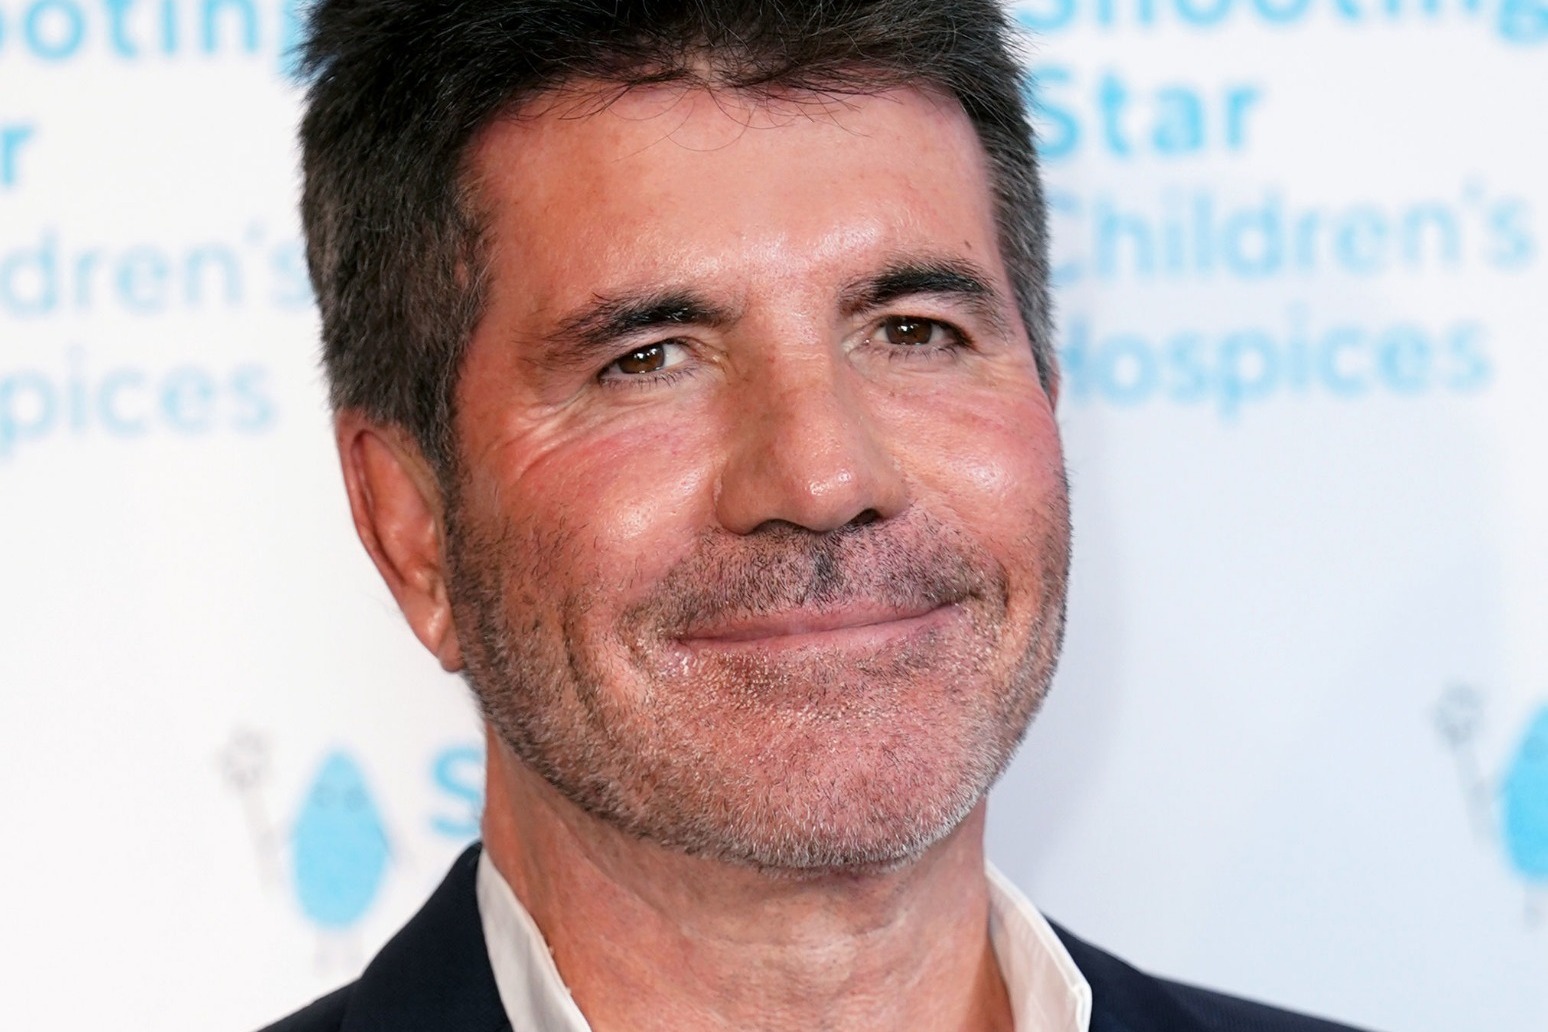 Simon Cowell to pair music industry stars with TikTok users in new project 